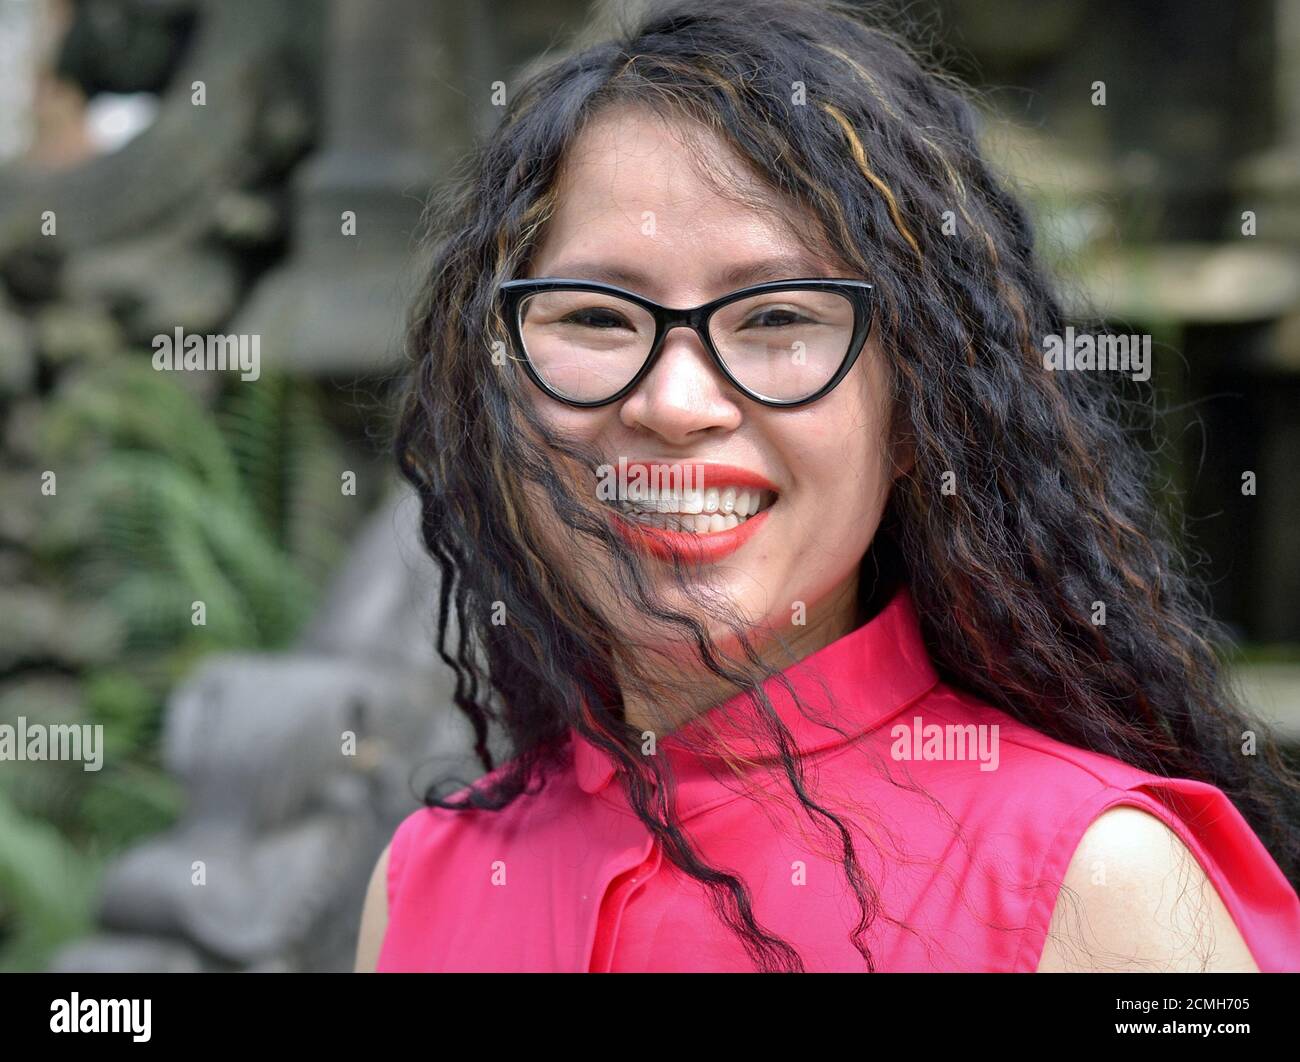 Young attractive cheerful Vietnamese woman with large eyeglasses wears a pink blouse and smiles for the camera. Stock Photo